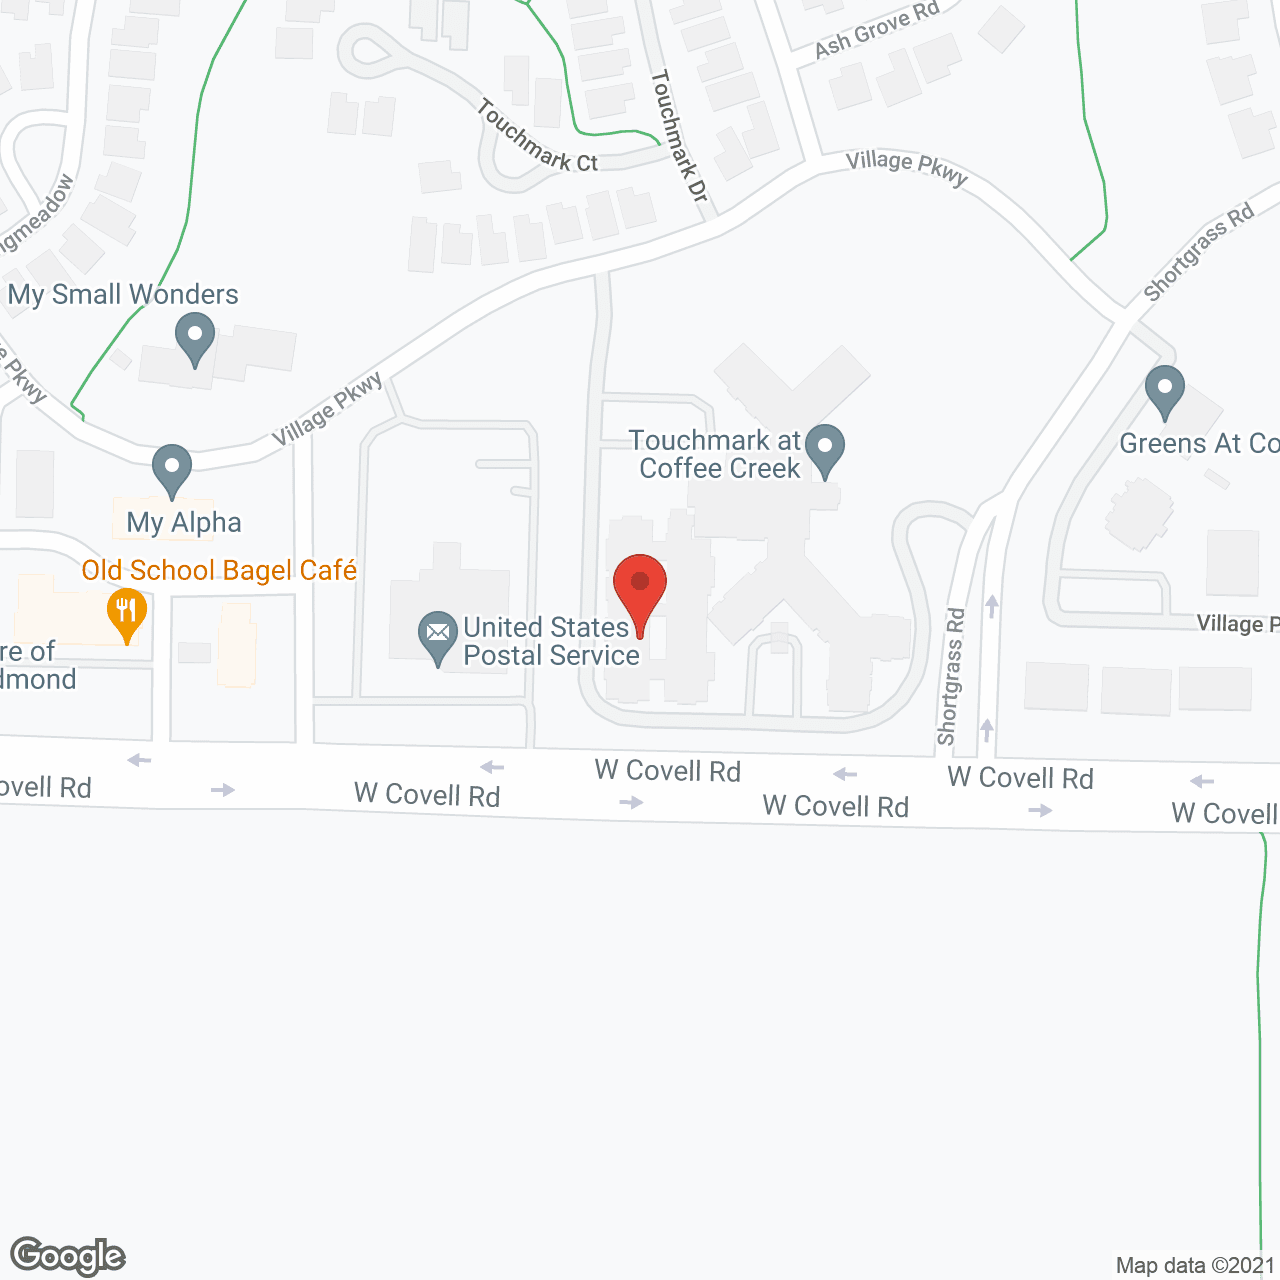 Touchmark at Coffee Creek in google map